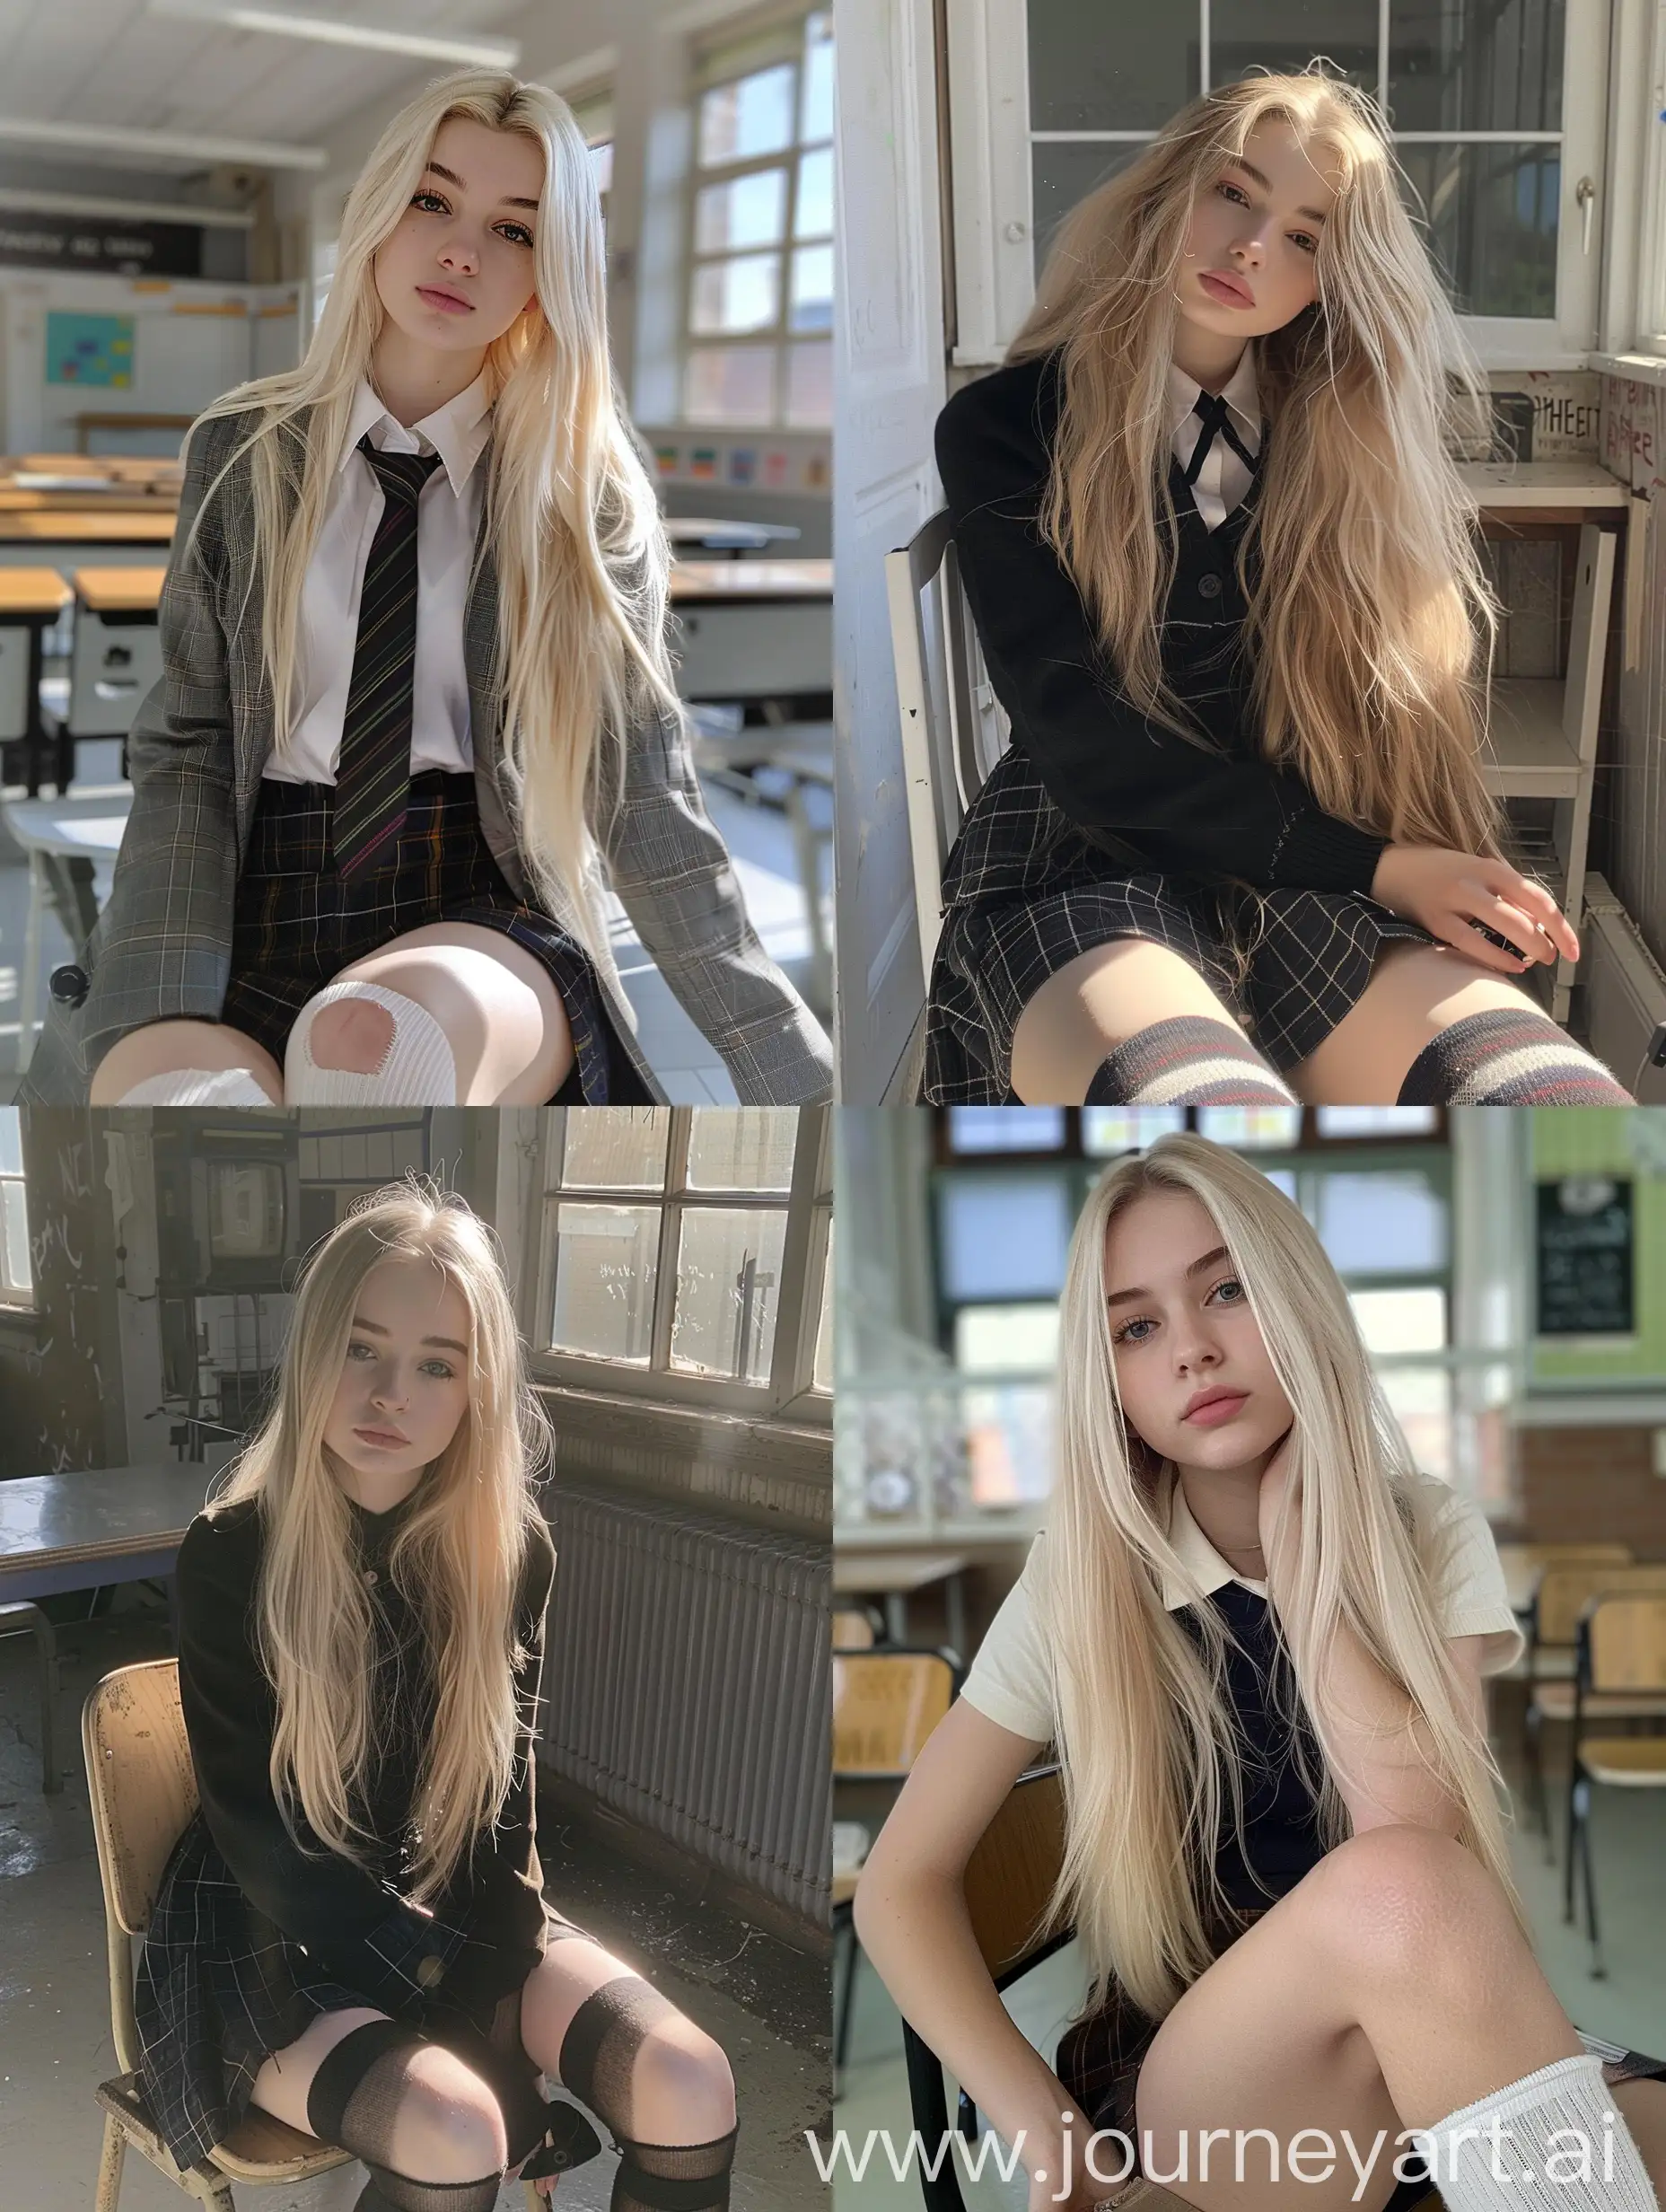 1  girl,    long  blond  hair ,   22  years  old,    influencer,    beauty   ,     in  the  school    ,school  uniform  ,  makeup,       sitting  on  chair  ,    socks  and  boots,    no  effect,     selfie   , iphone  selfie,      no  filters ,   iphone  photo    natural